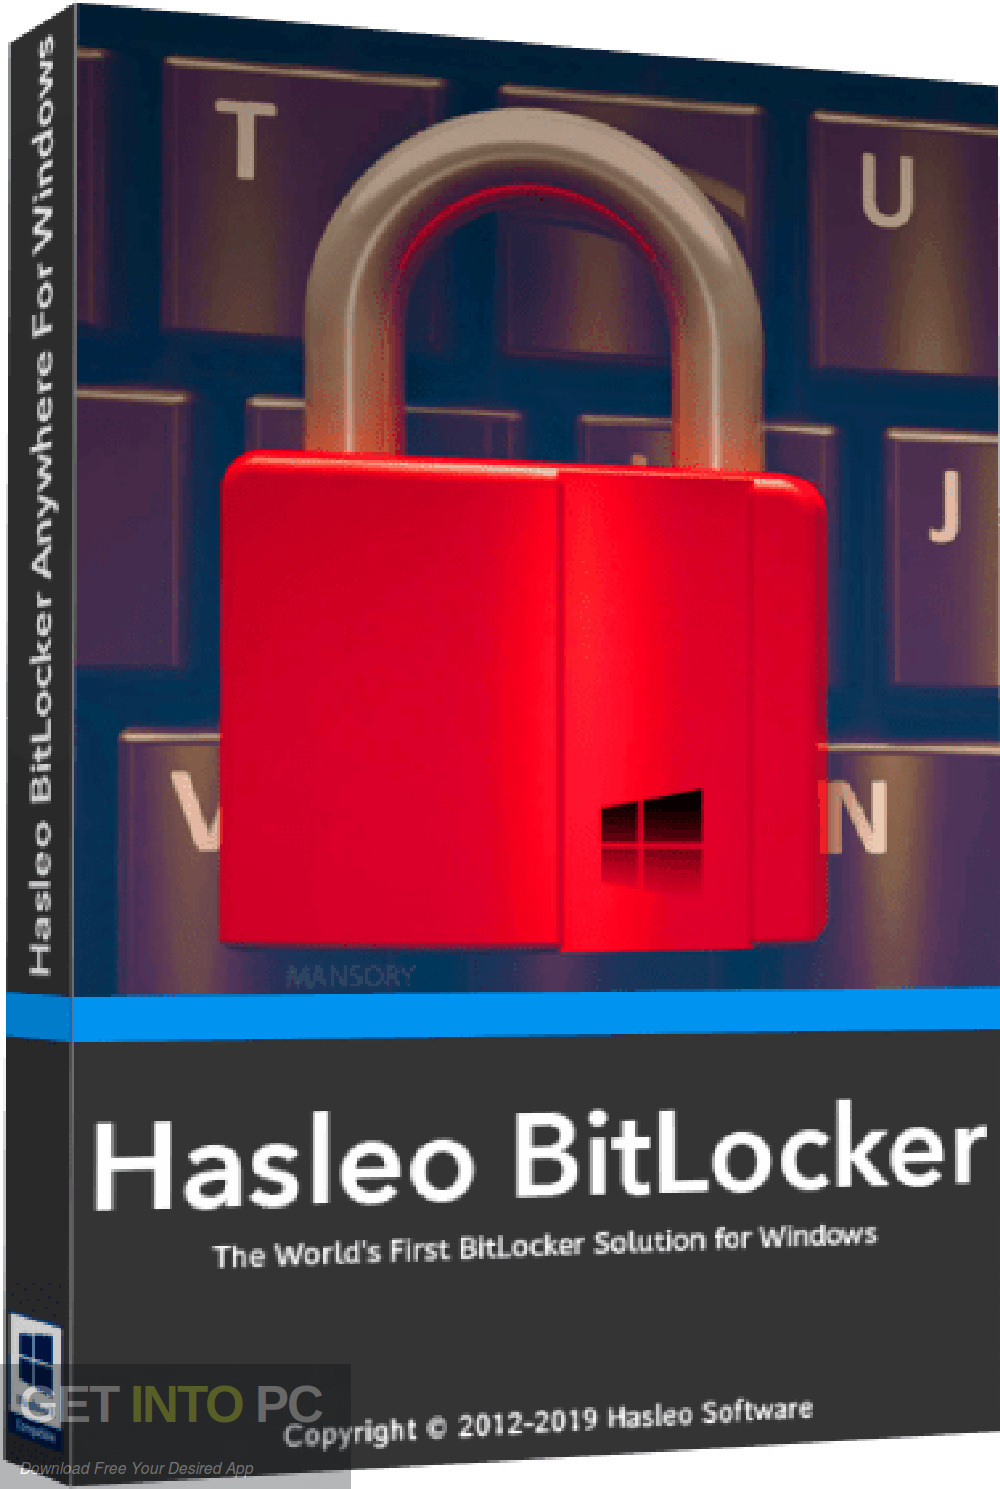 Hasleo BitLocker Anywhere Pro 9.3 instal the new version for iphone